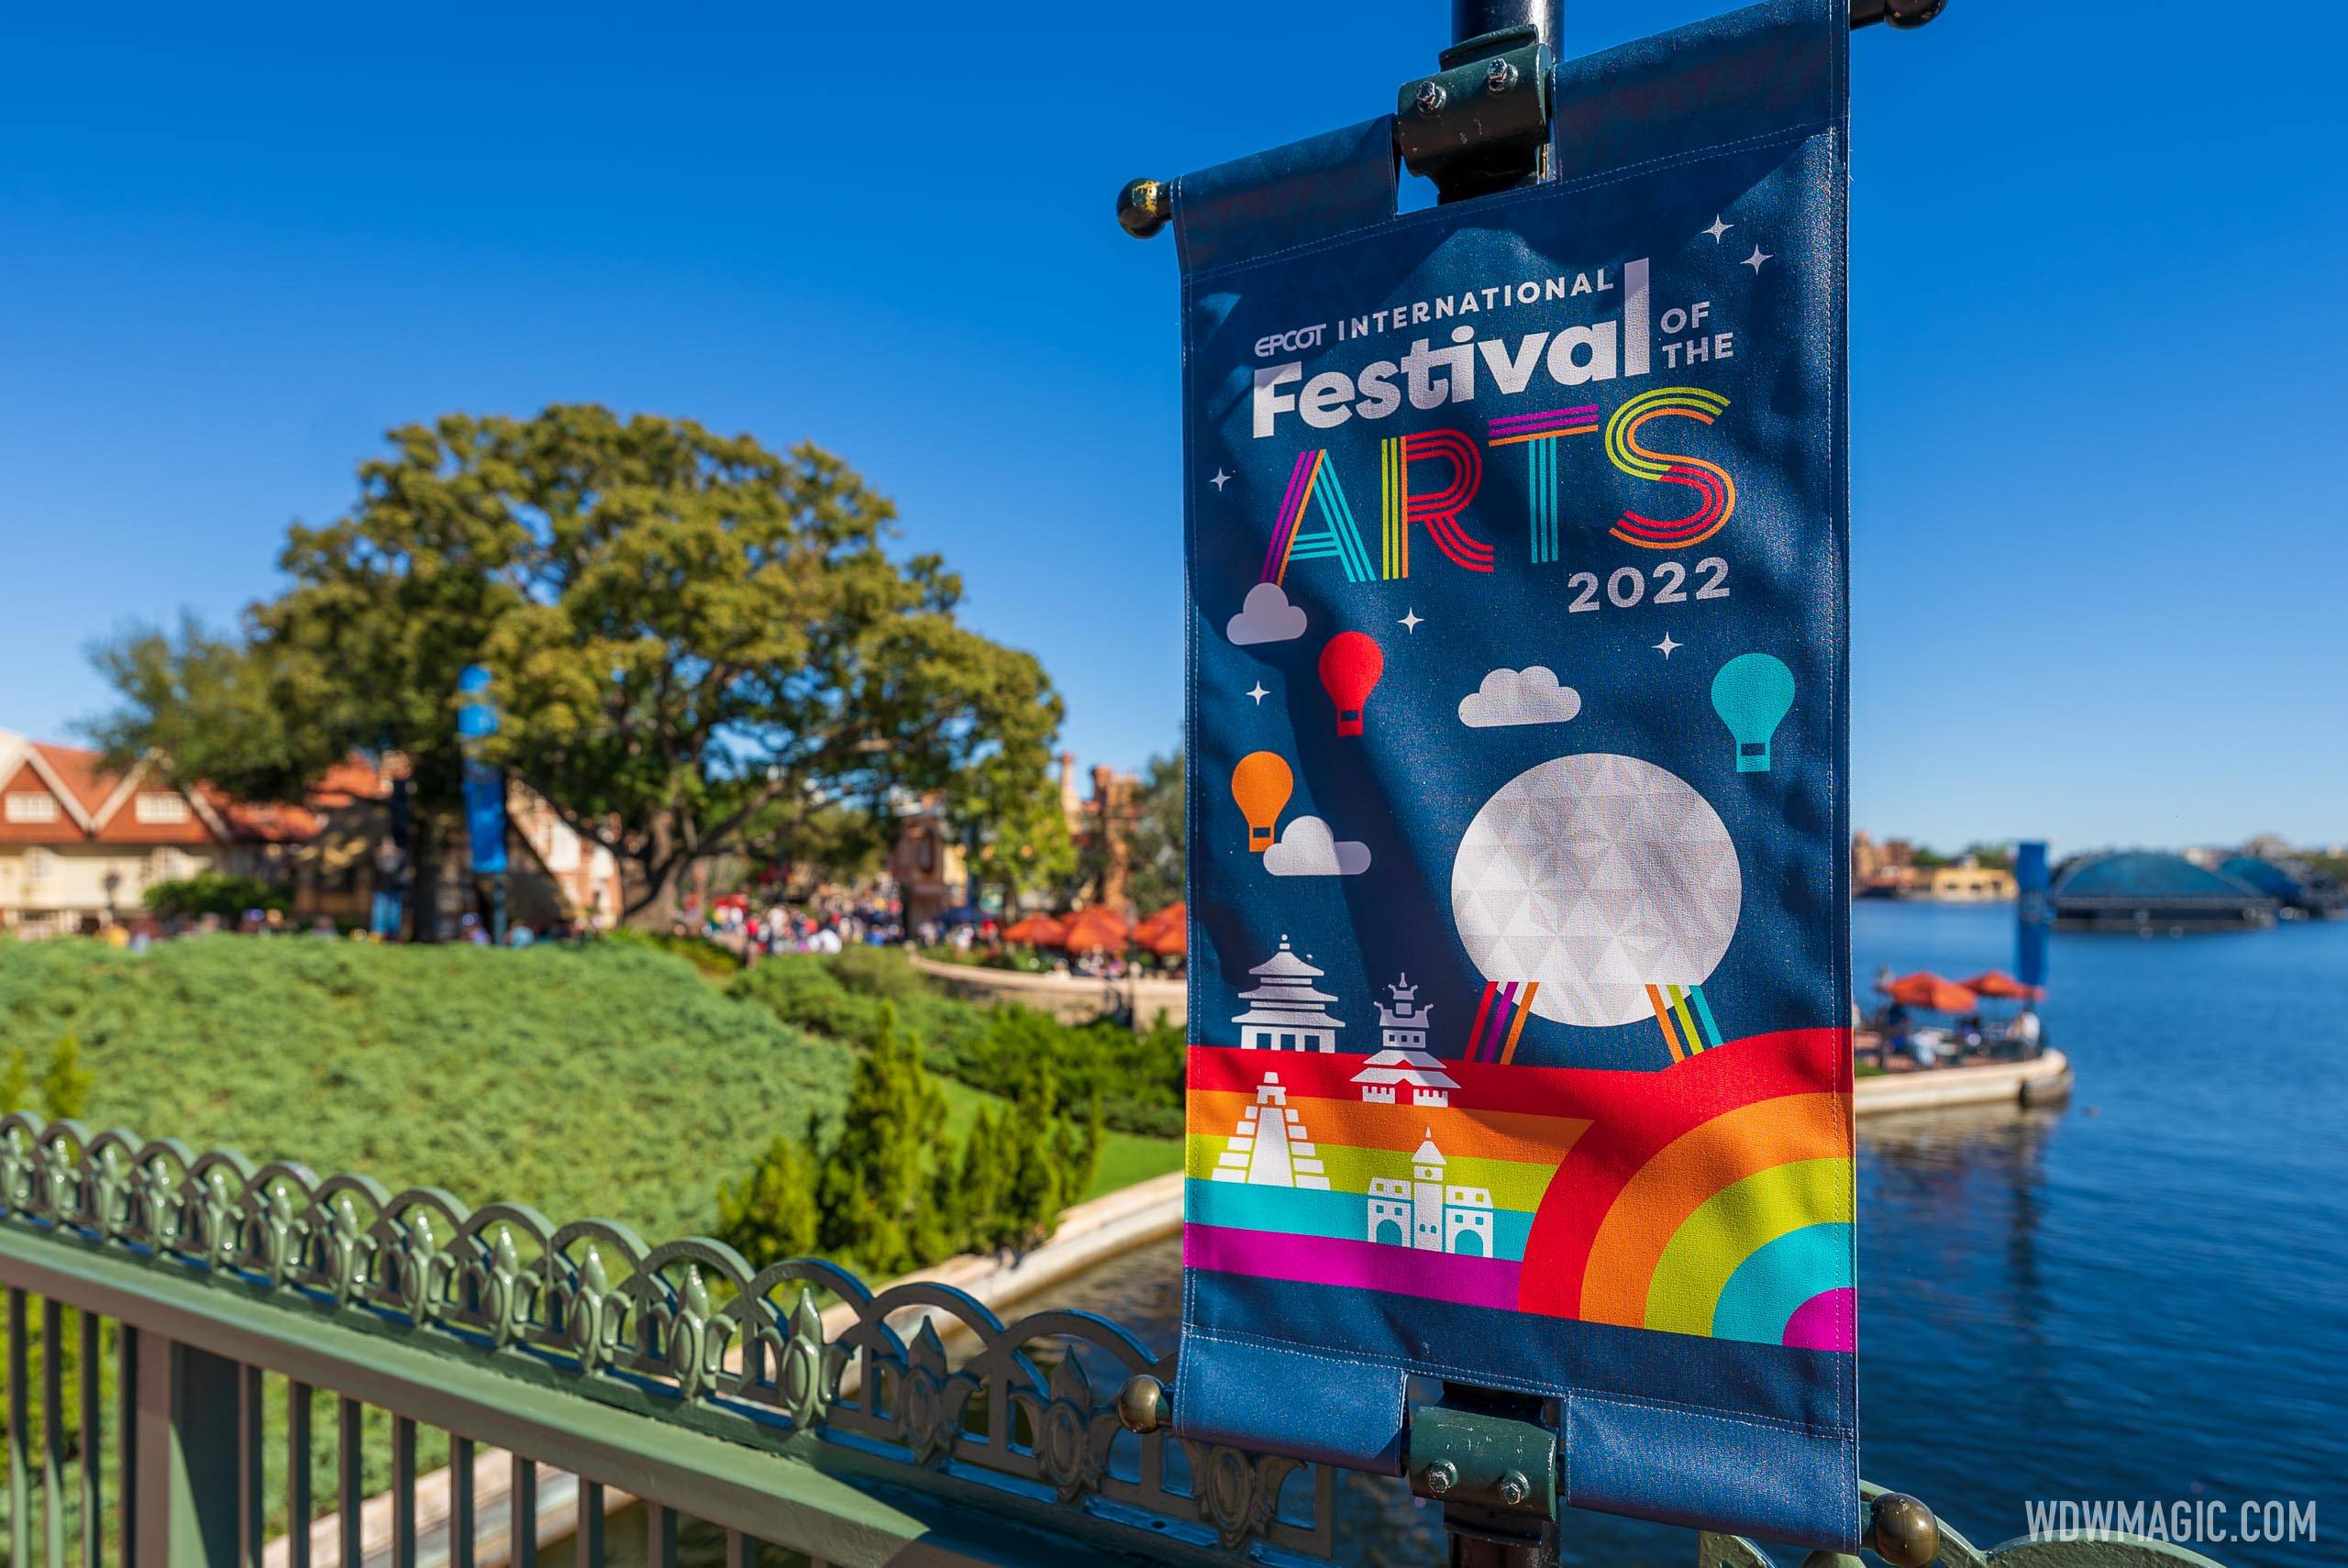 Opening day at the 2022 Epcot International Festival of the Arts